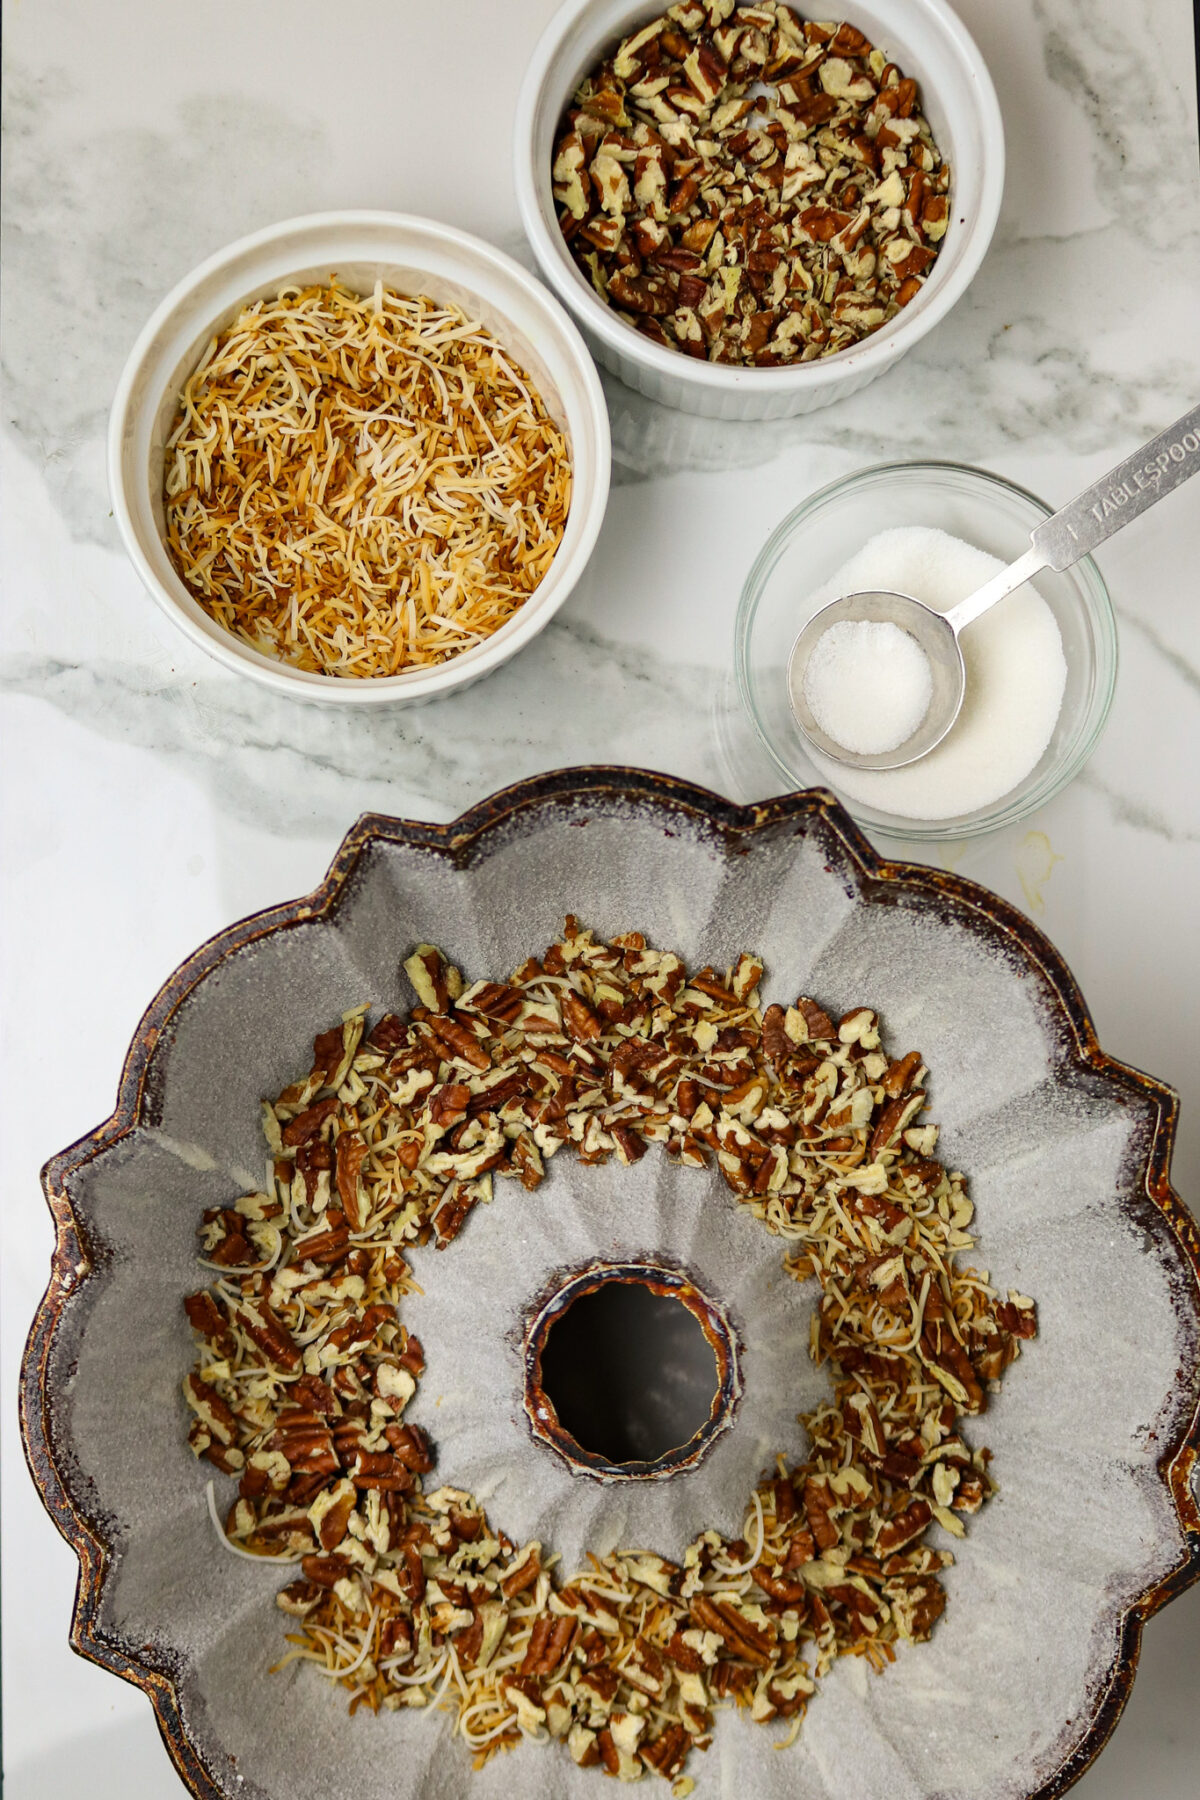 A prepared bundt cake pan with nuts and coconut on the bottom and bowls of sugar, coconut, and pecans beside it.